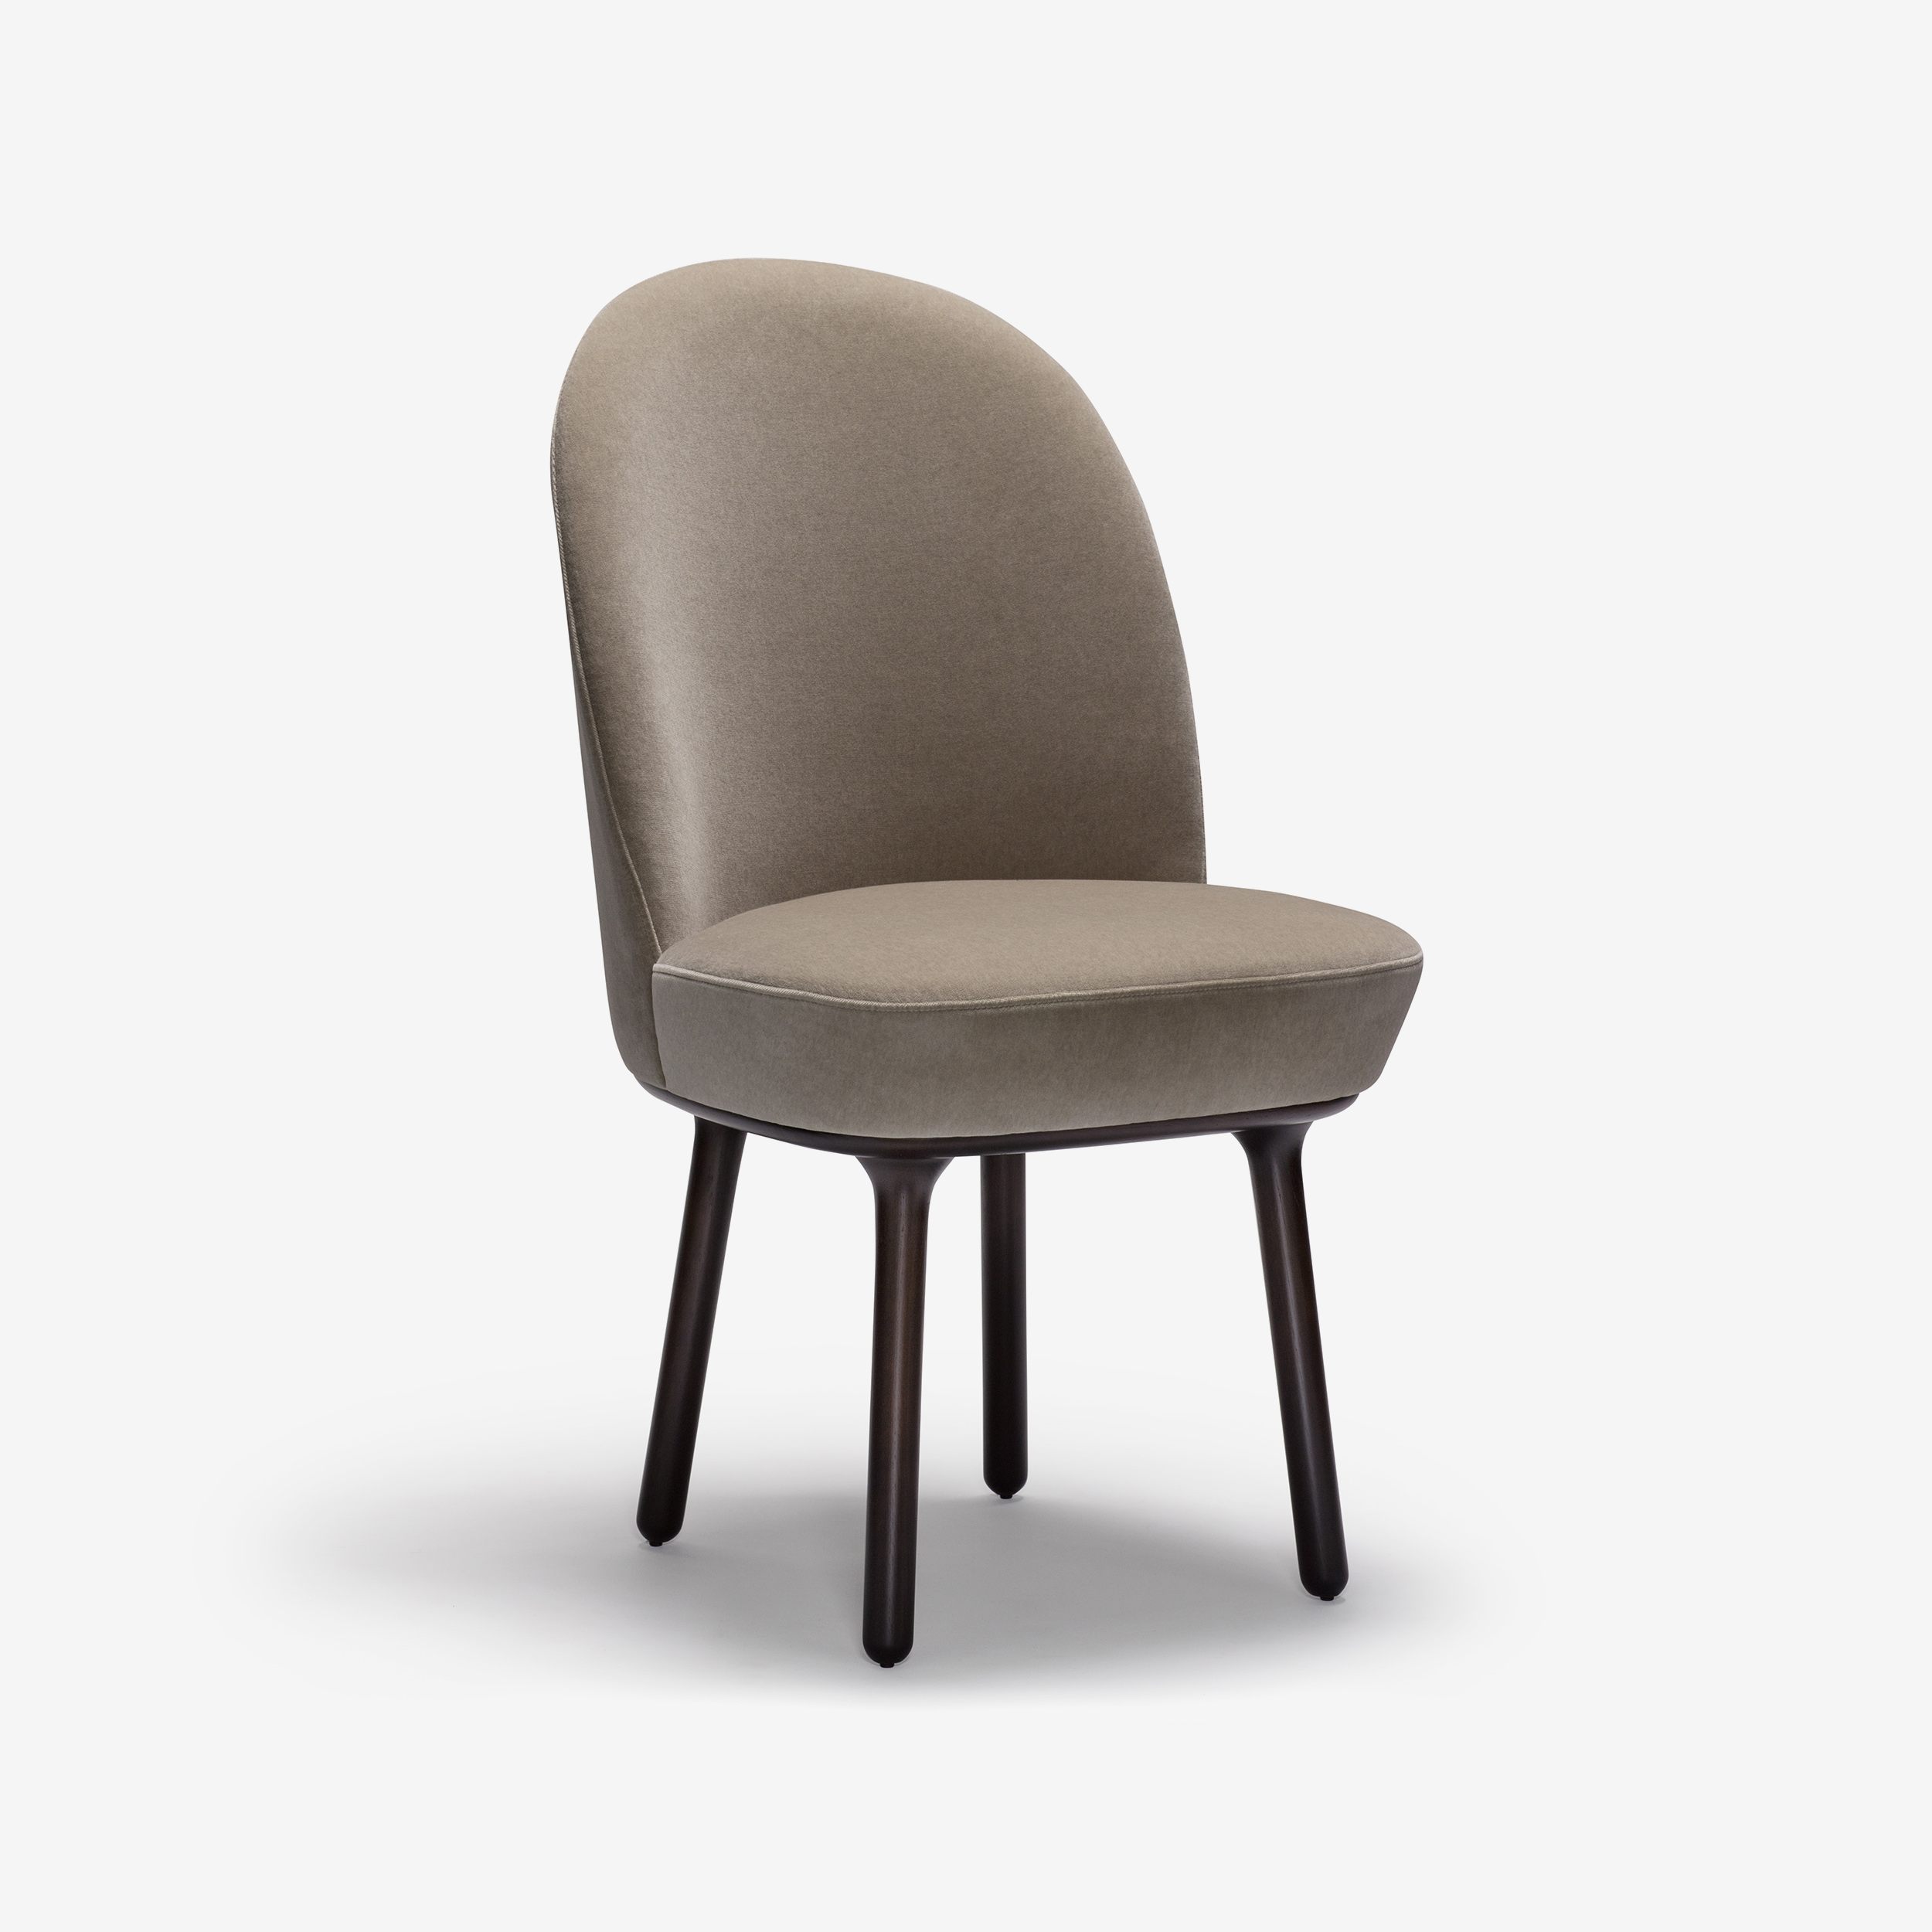 Sé Collections: Beetley Chair: Wooden Legs